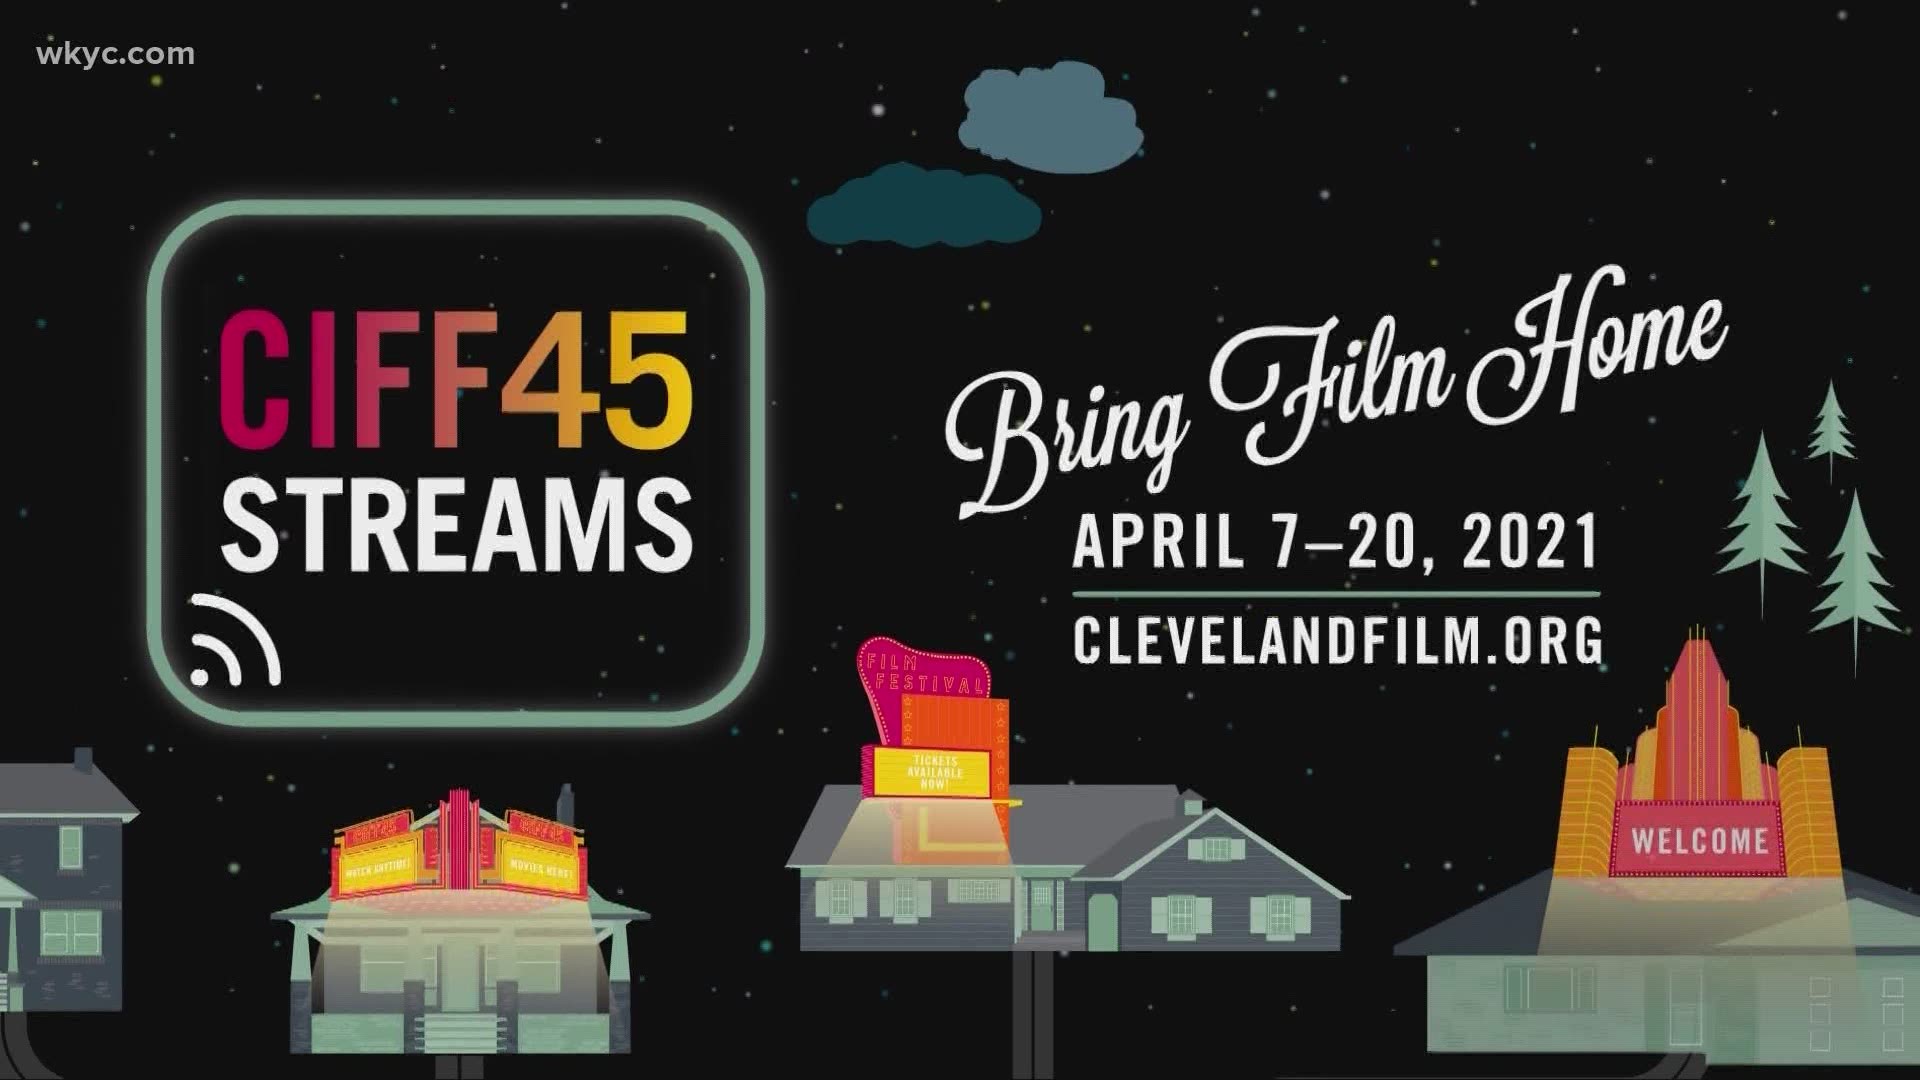 CIFF45 Streams takes places from April 7-20, 2021. This year's theme is 'Bring Film Home.'